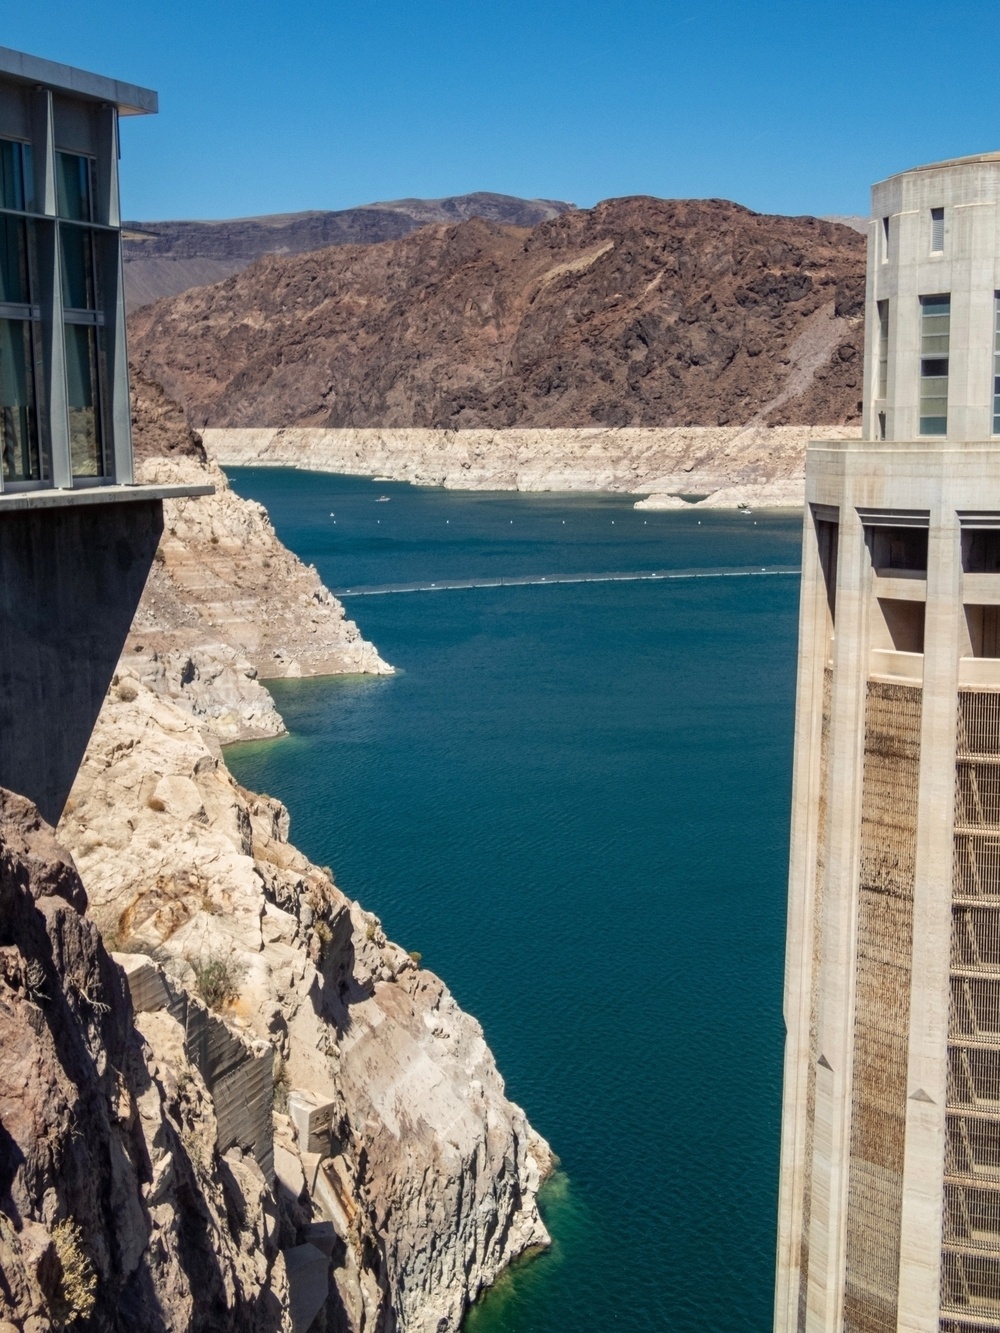 Lake Meade upstream of hoover dam with white bathtub ring